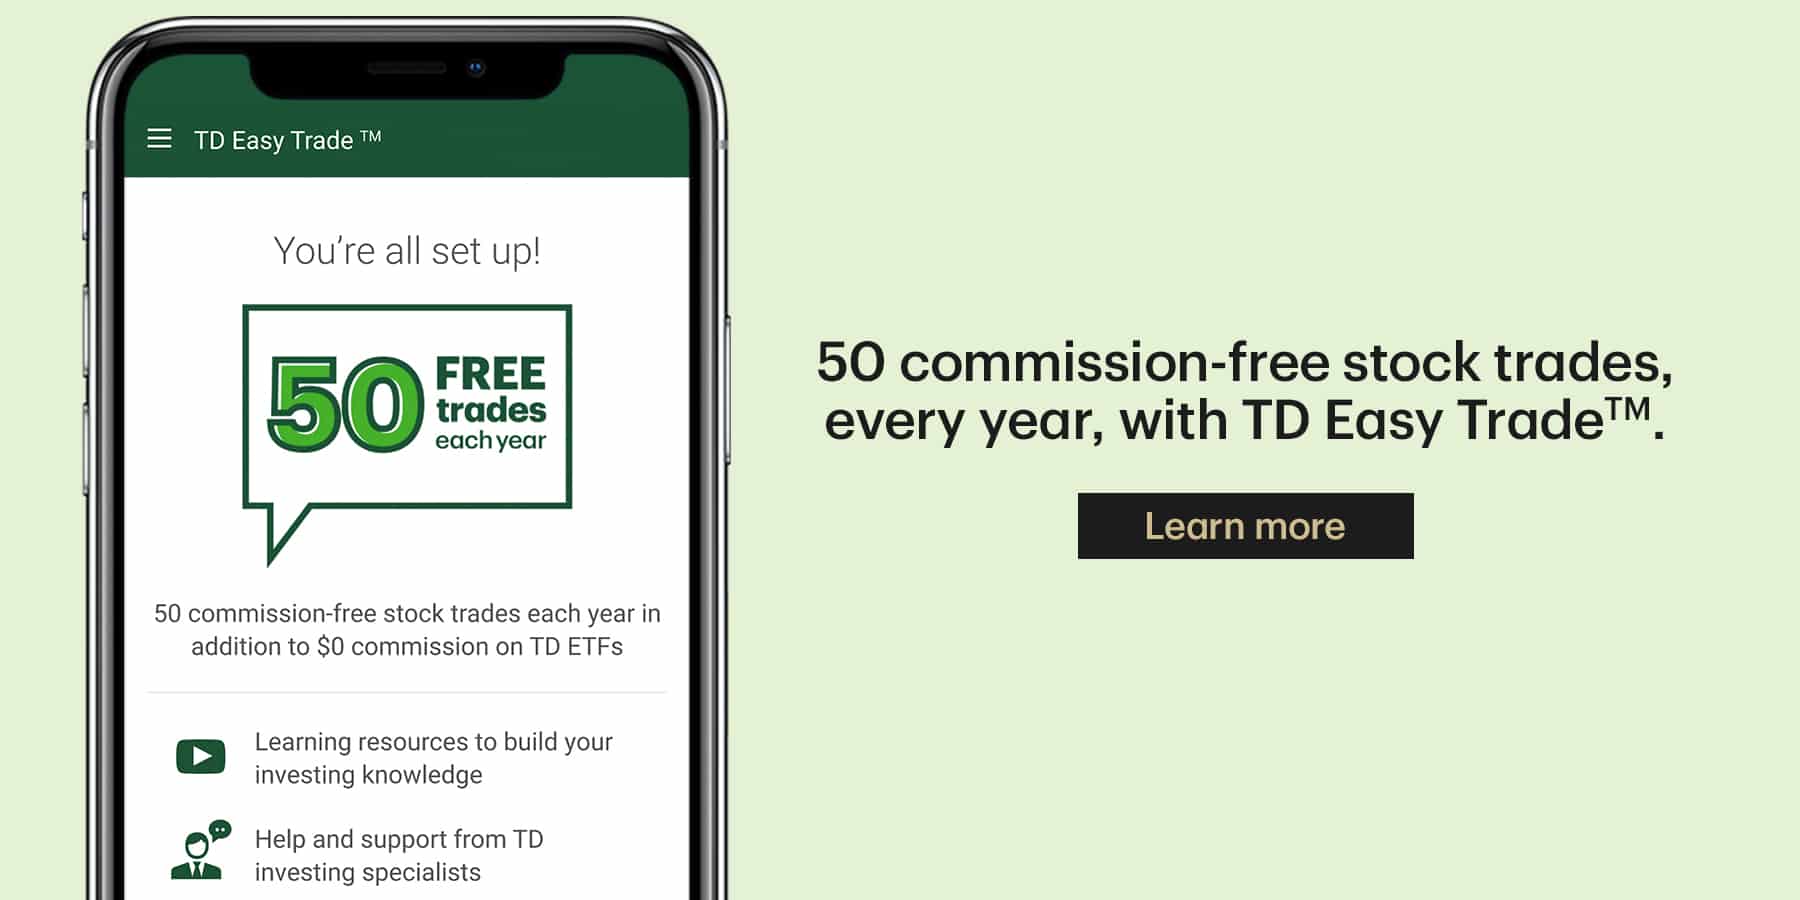 50 commission-free stock trades every year, with TD Easy TradeTM50 commission-free stock trades every year, with TD Easy TradeTM